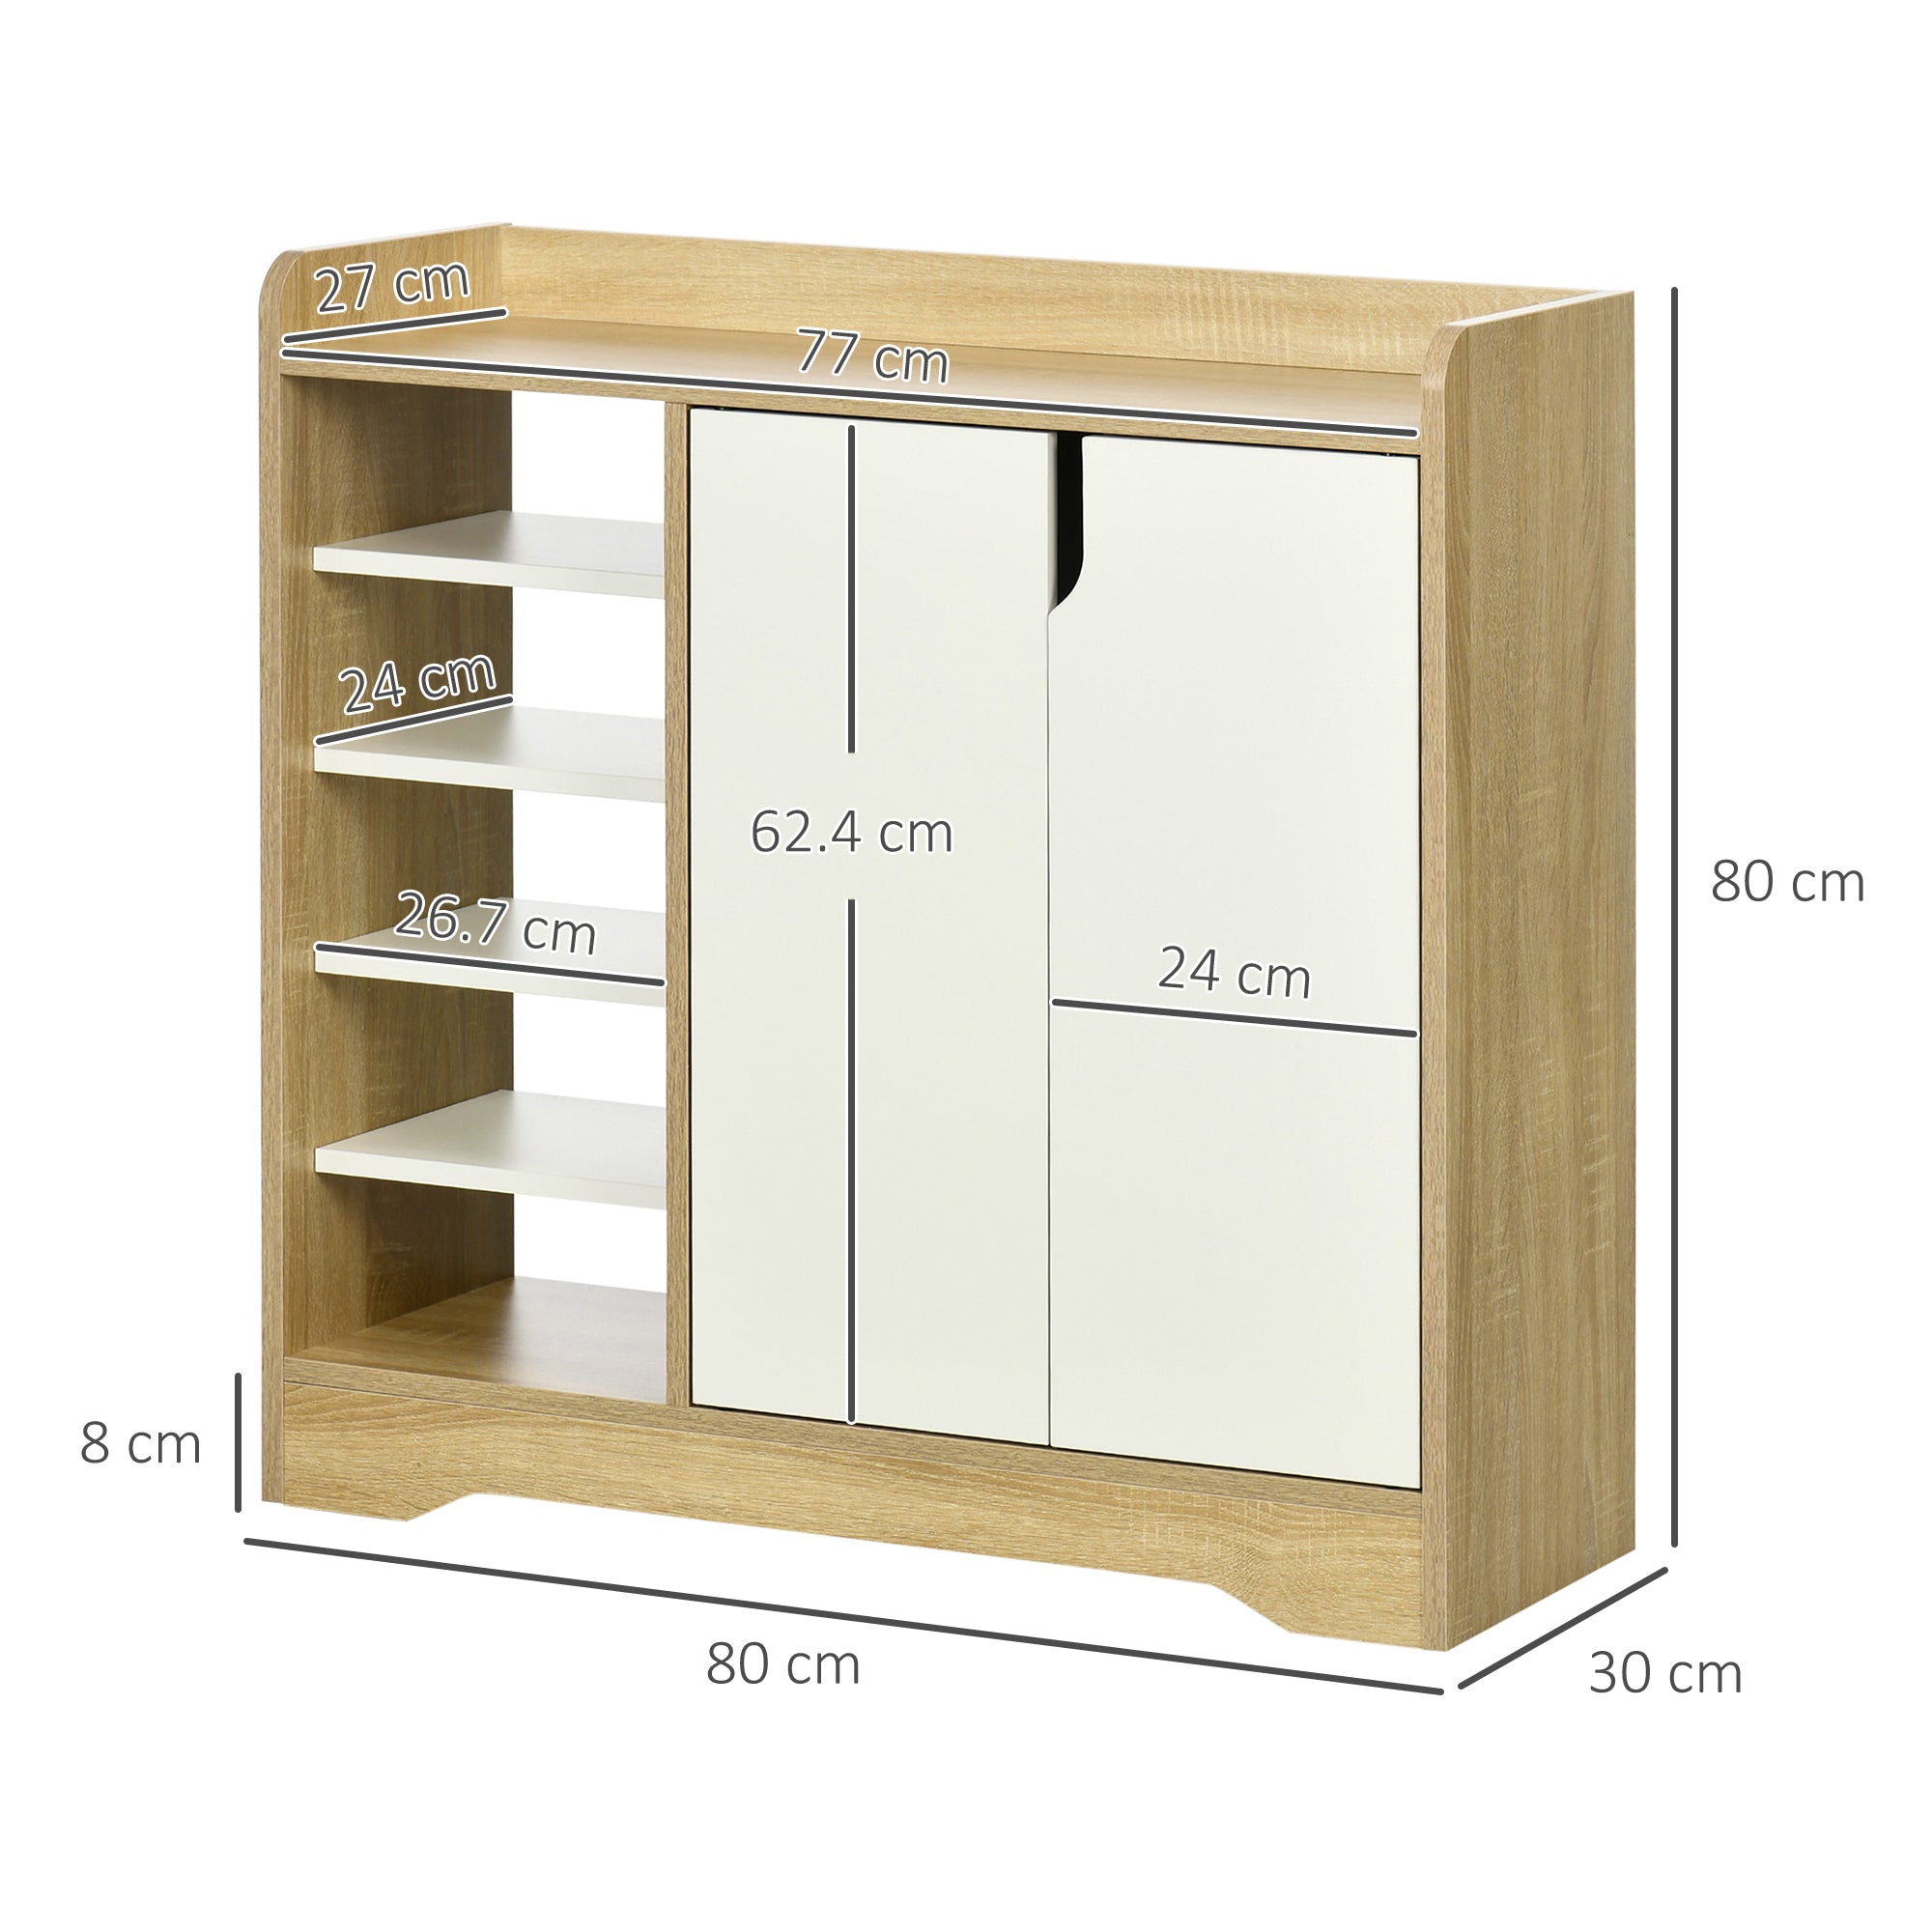 HOMCOM Shoe Storage with Double Doors and Open Shelves 13 Pair Shoe Storage Organizer for Entryway Hallway Natural and White